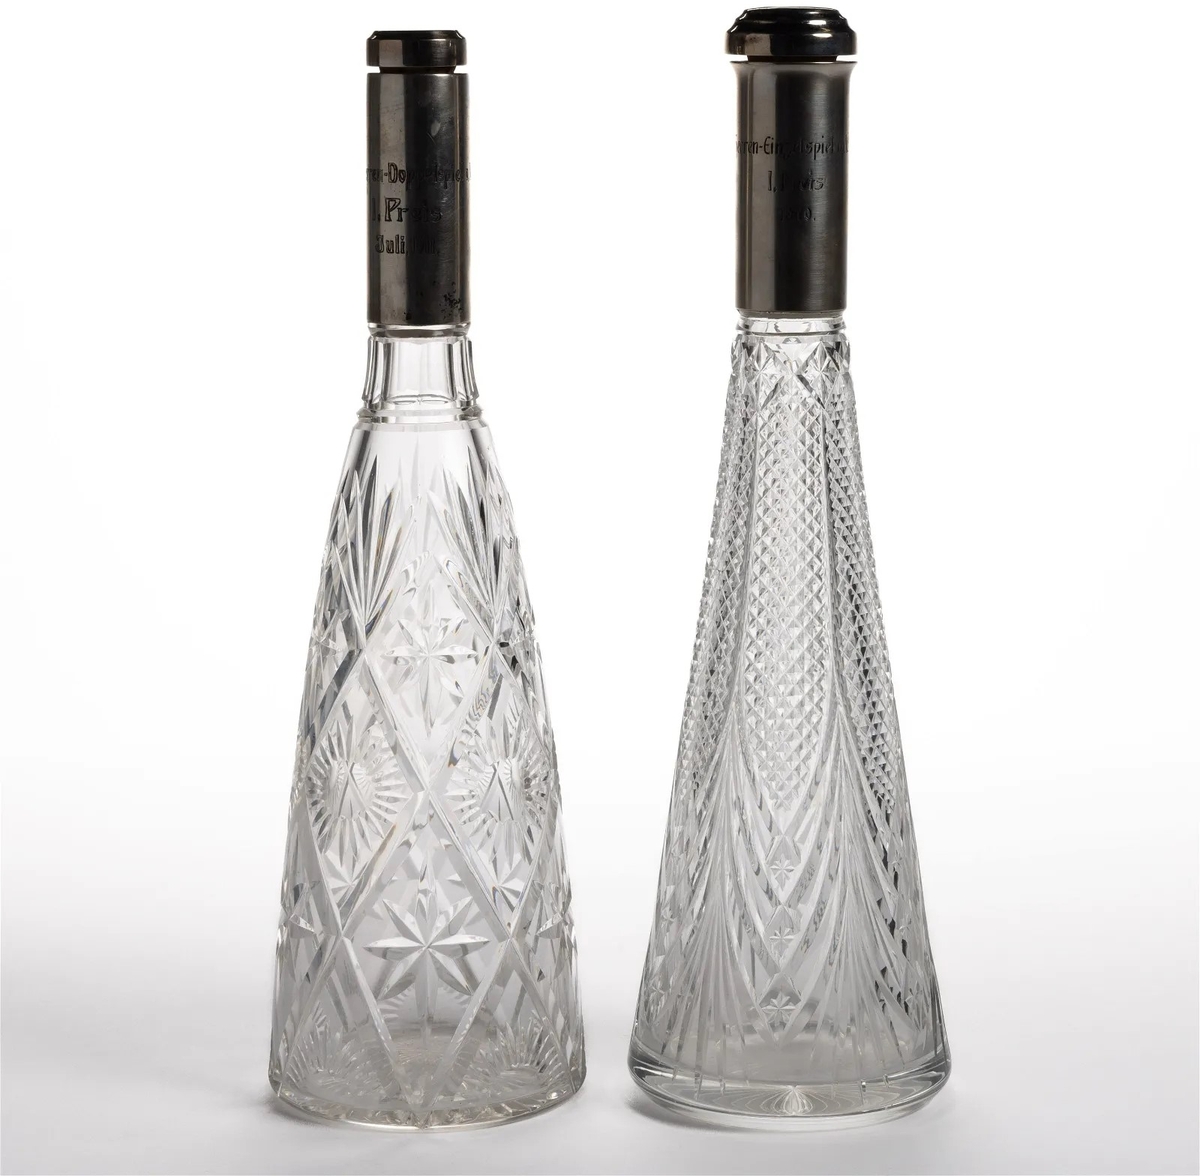 Vintage Silver-Collared and Cut Glass Decanters